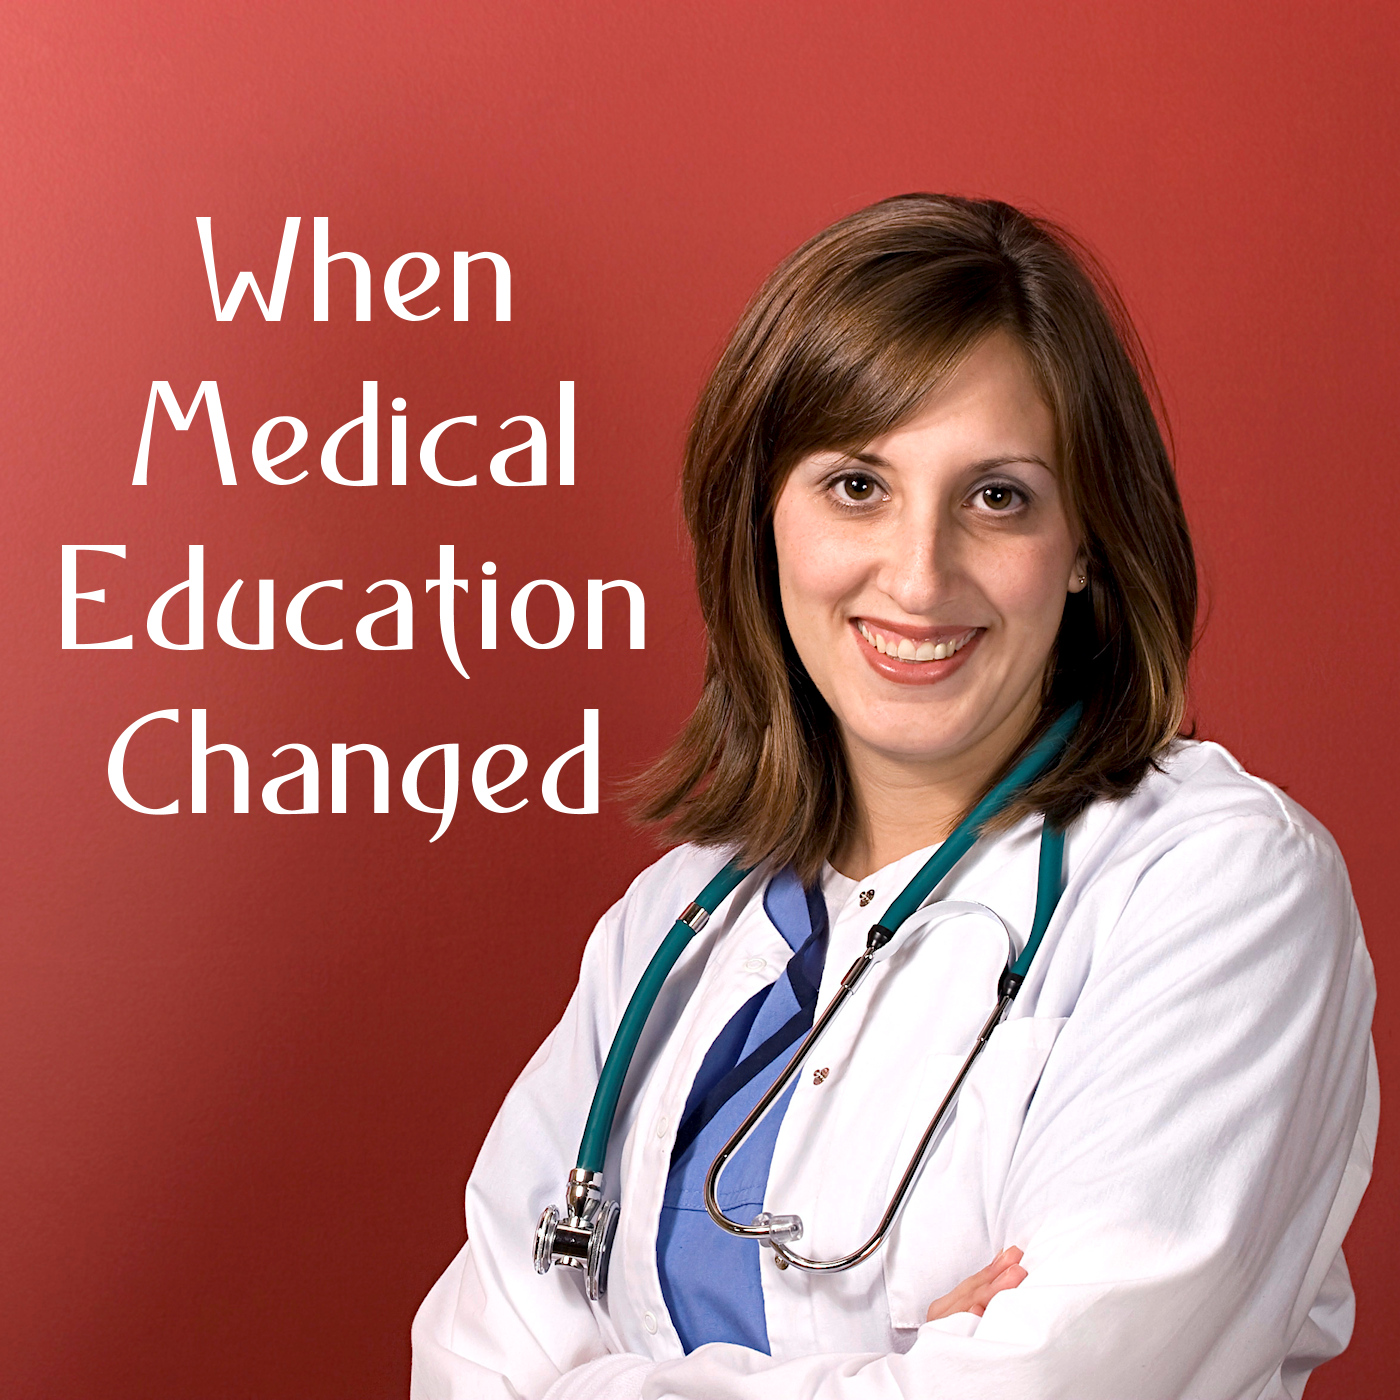 When Medical Education Changed